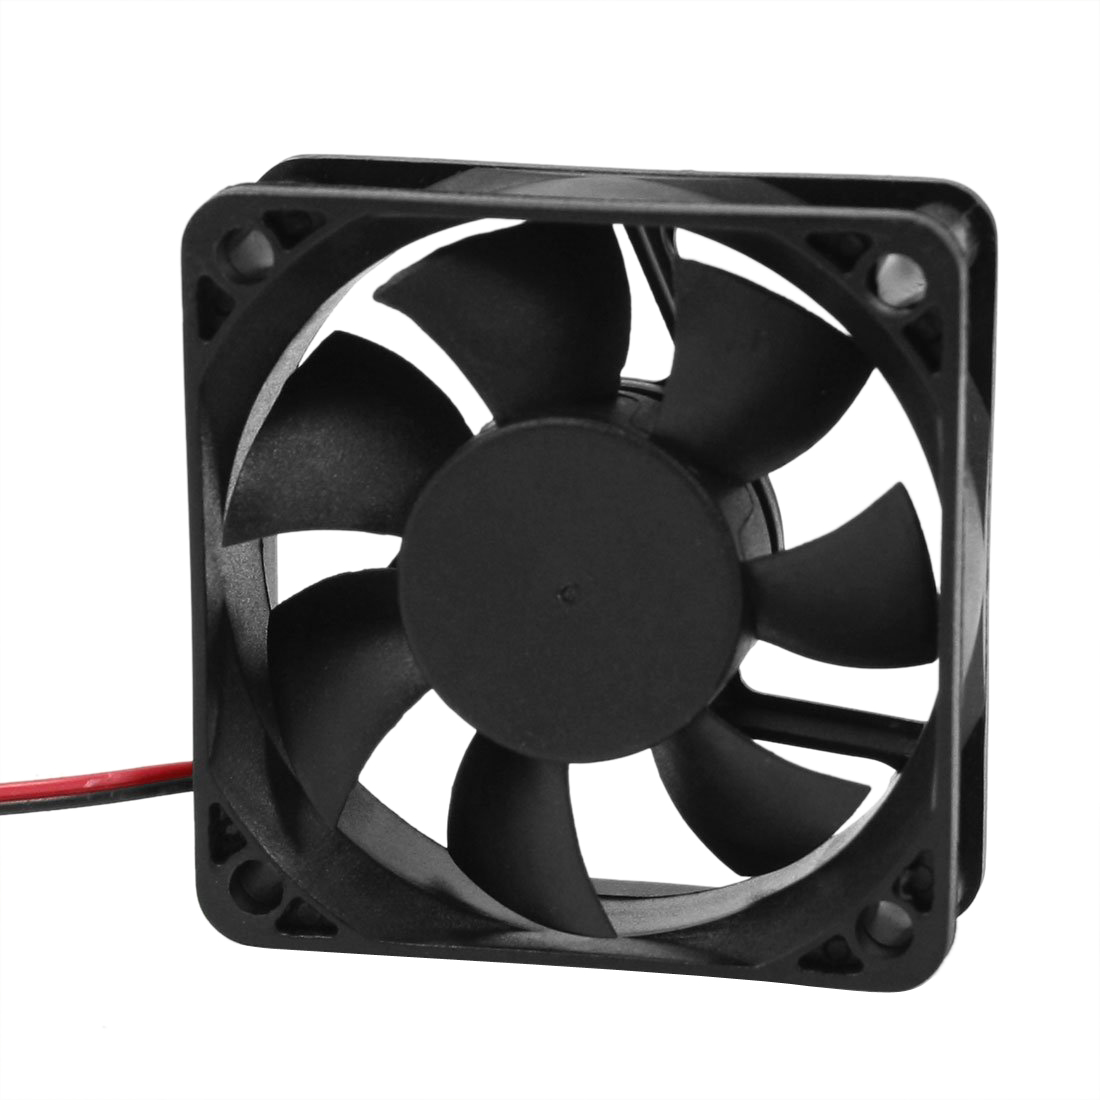 2016 New DC 12V 2Pins Cooling Fan 60mm x 15mm for PC Computer Case CPU Cooler